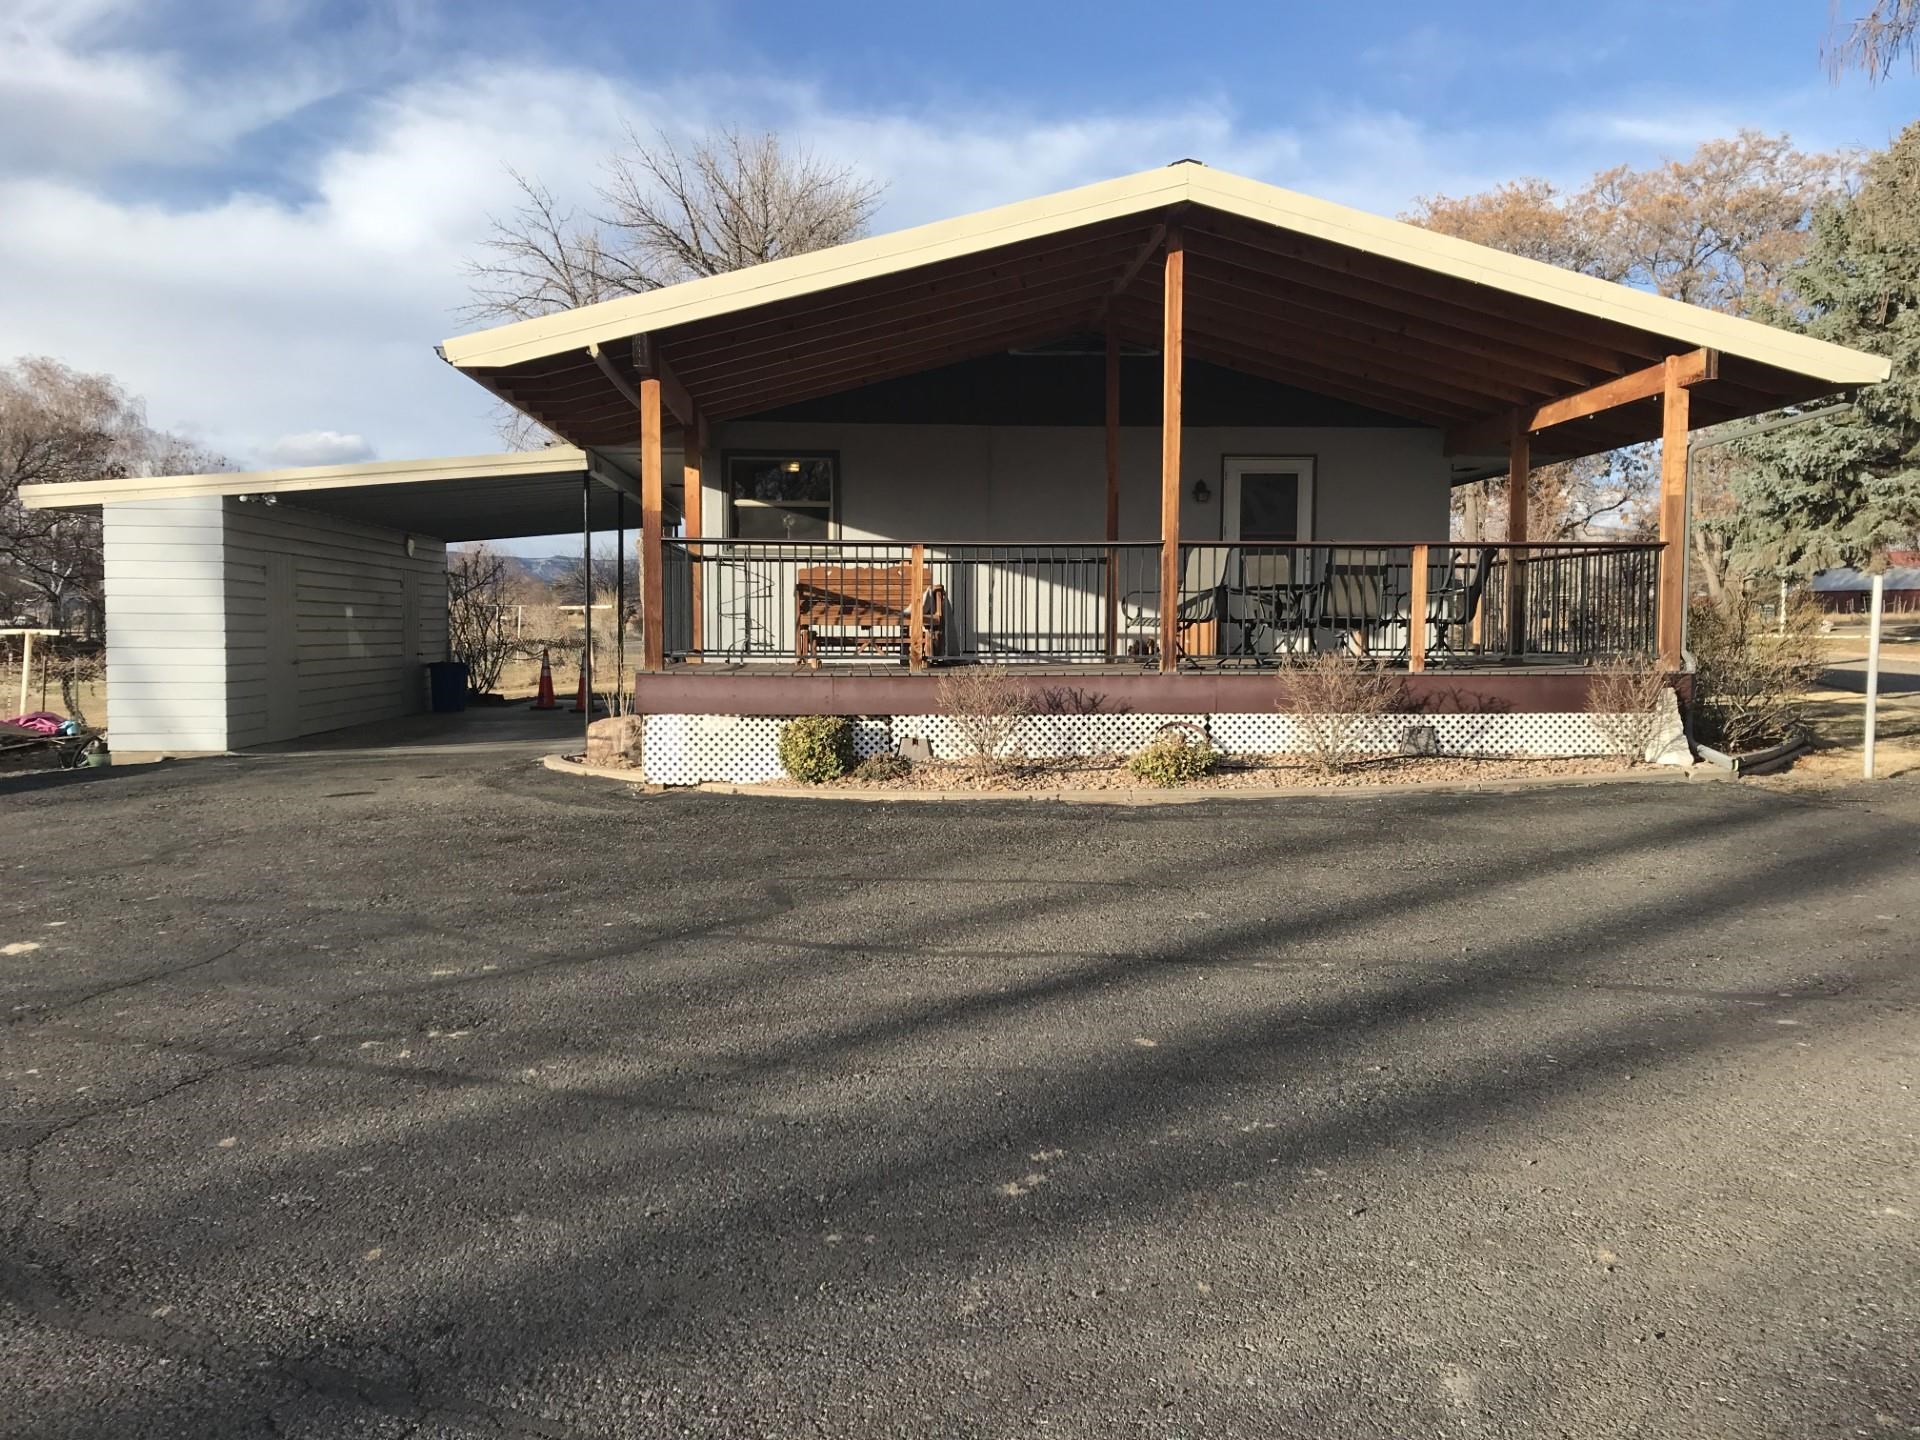 771 26 1/2 Road, Grand Junction, CO 81506